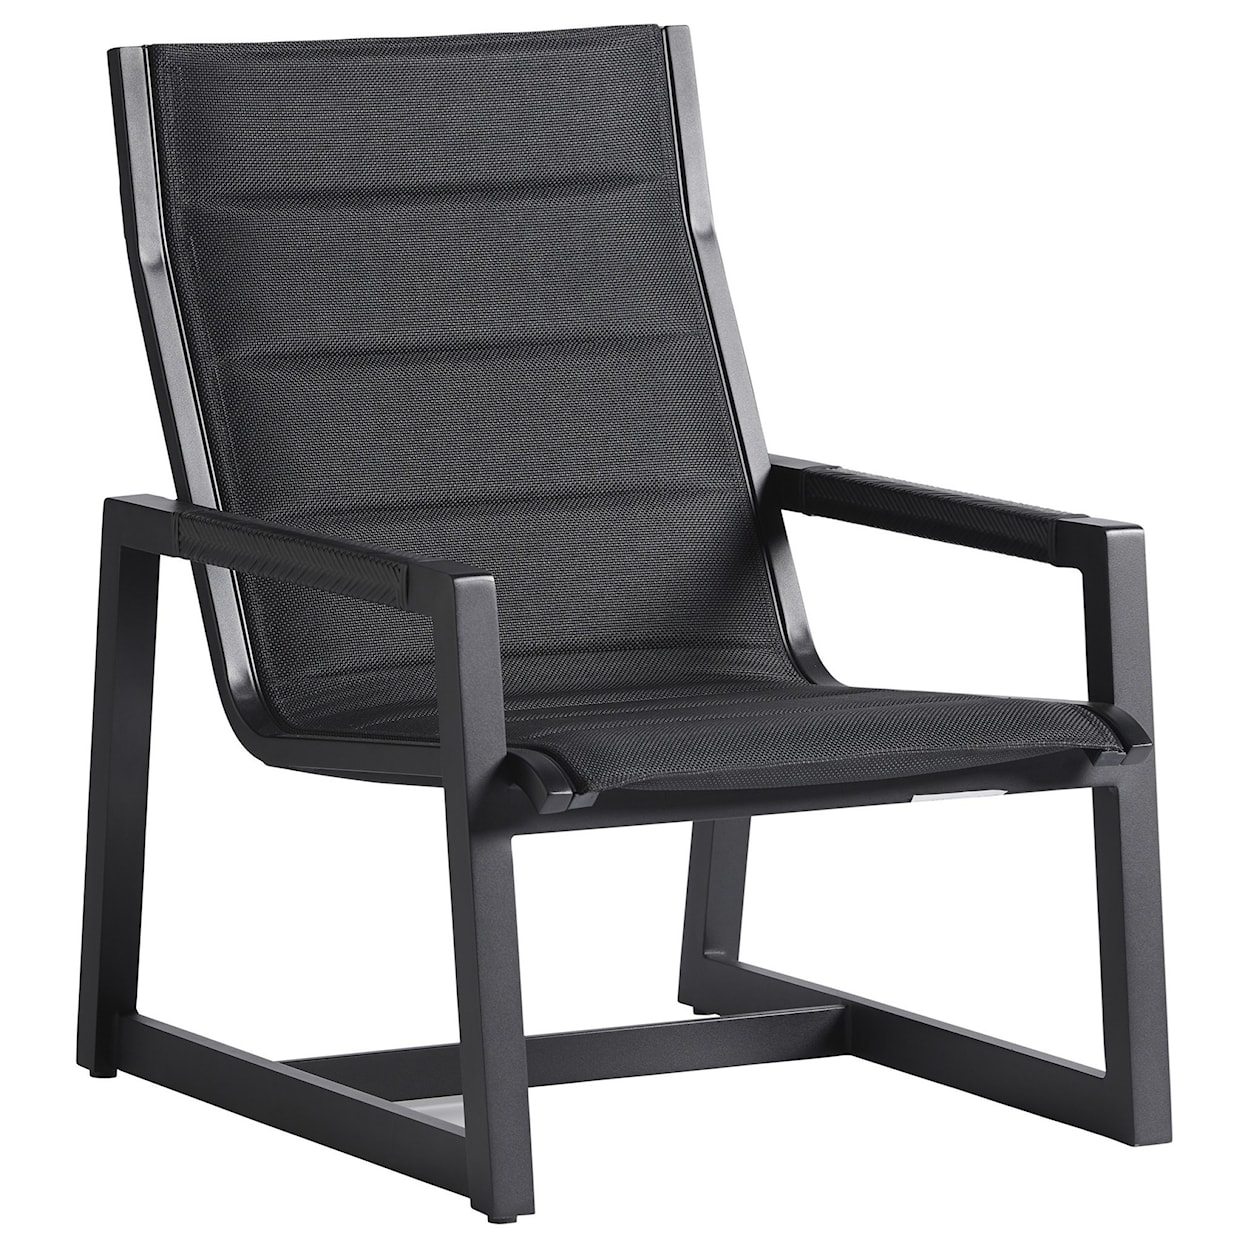 Tommy Bahama Outdoor Living South Beach Lounge Chair